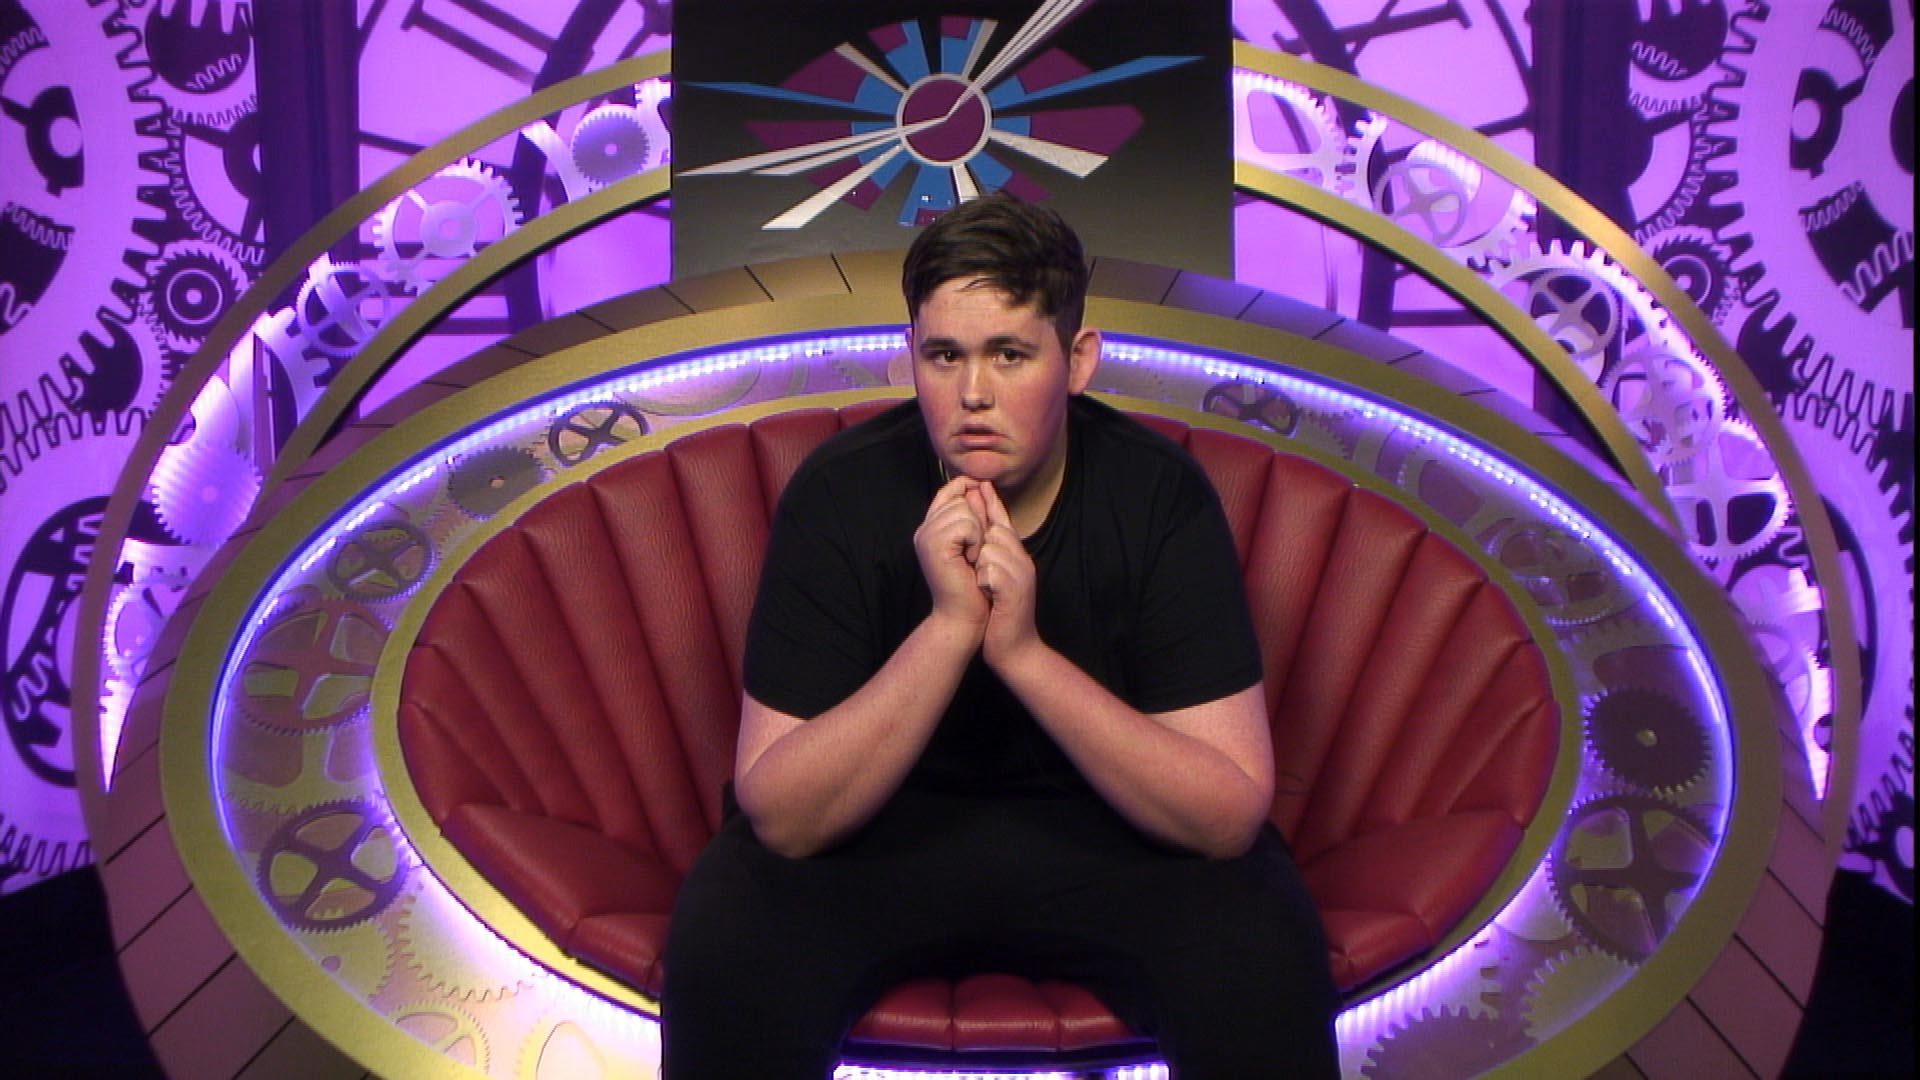 Day 16: Nominations twist revealed, and Jack saves himself from eviction